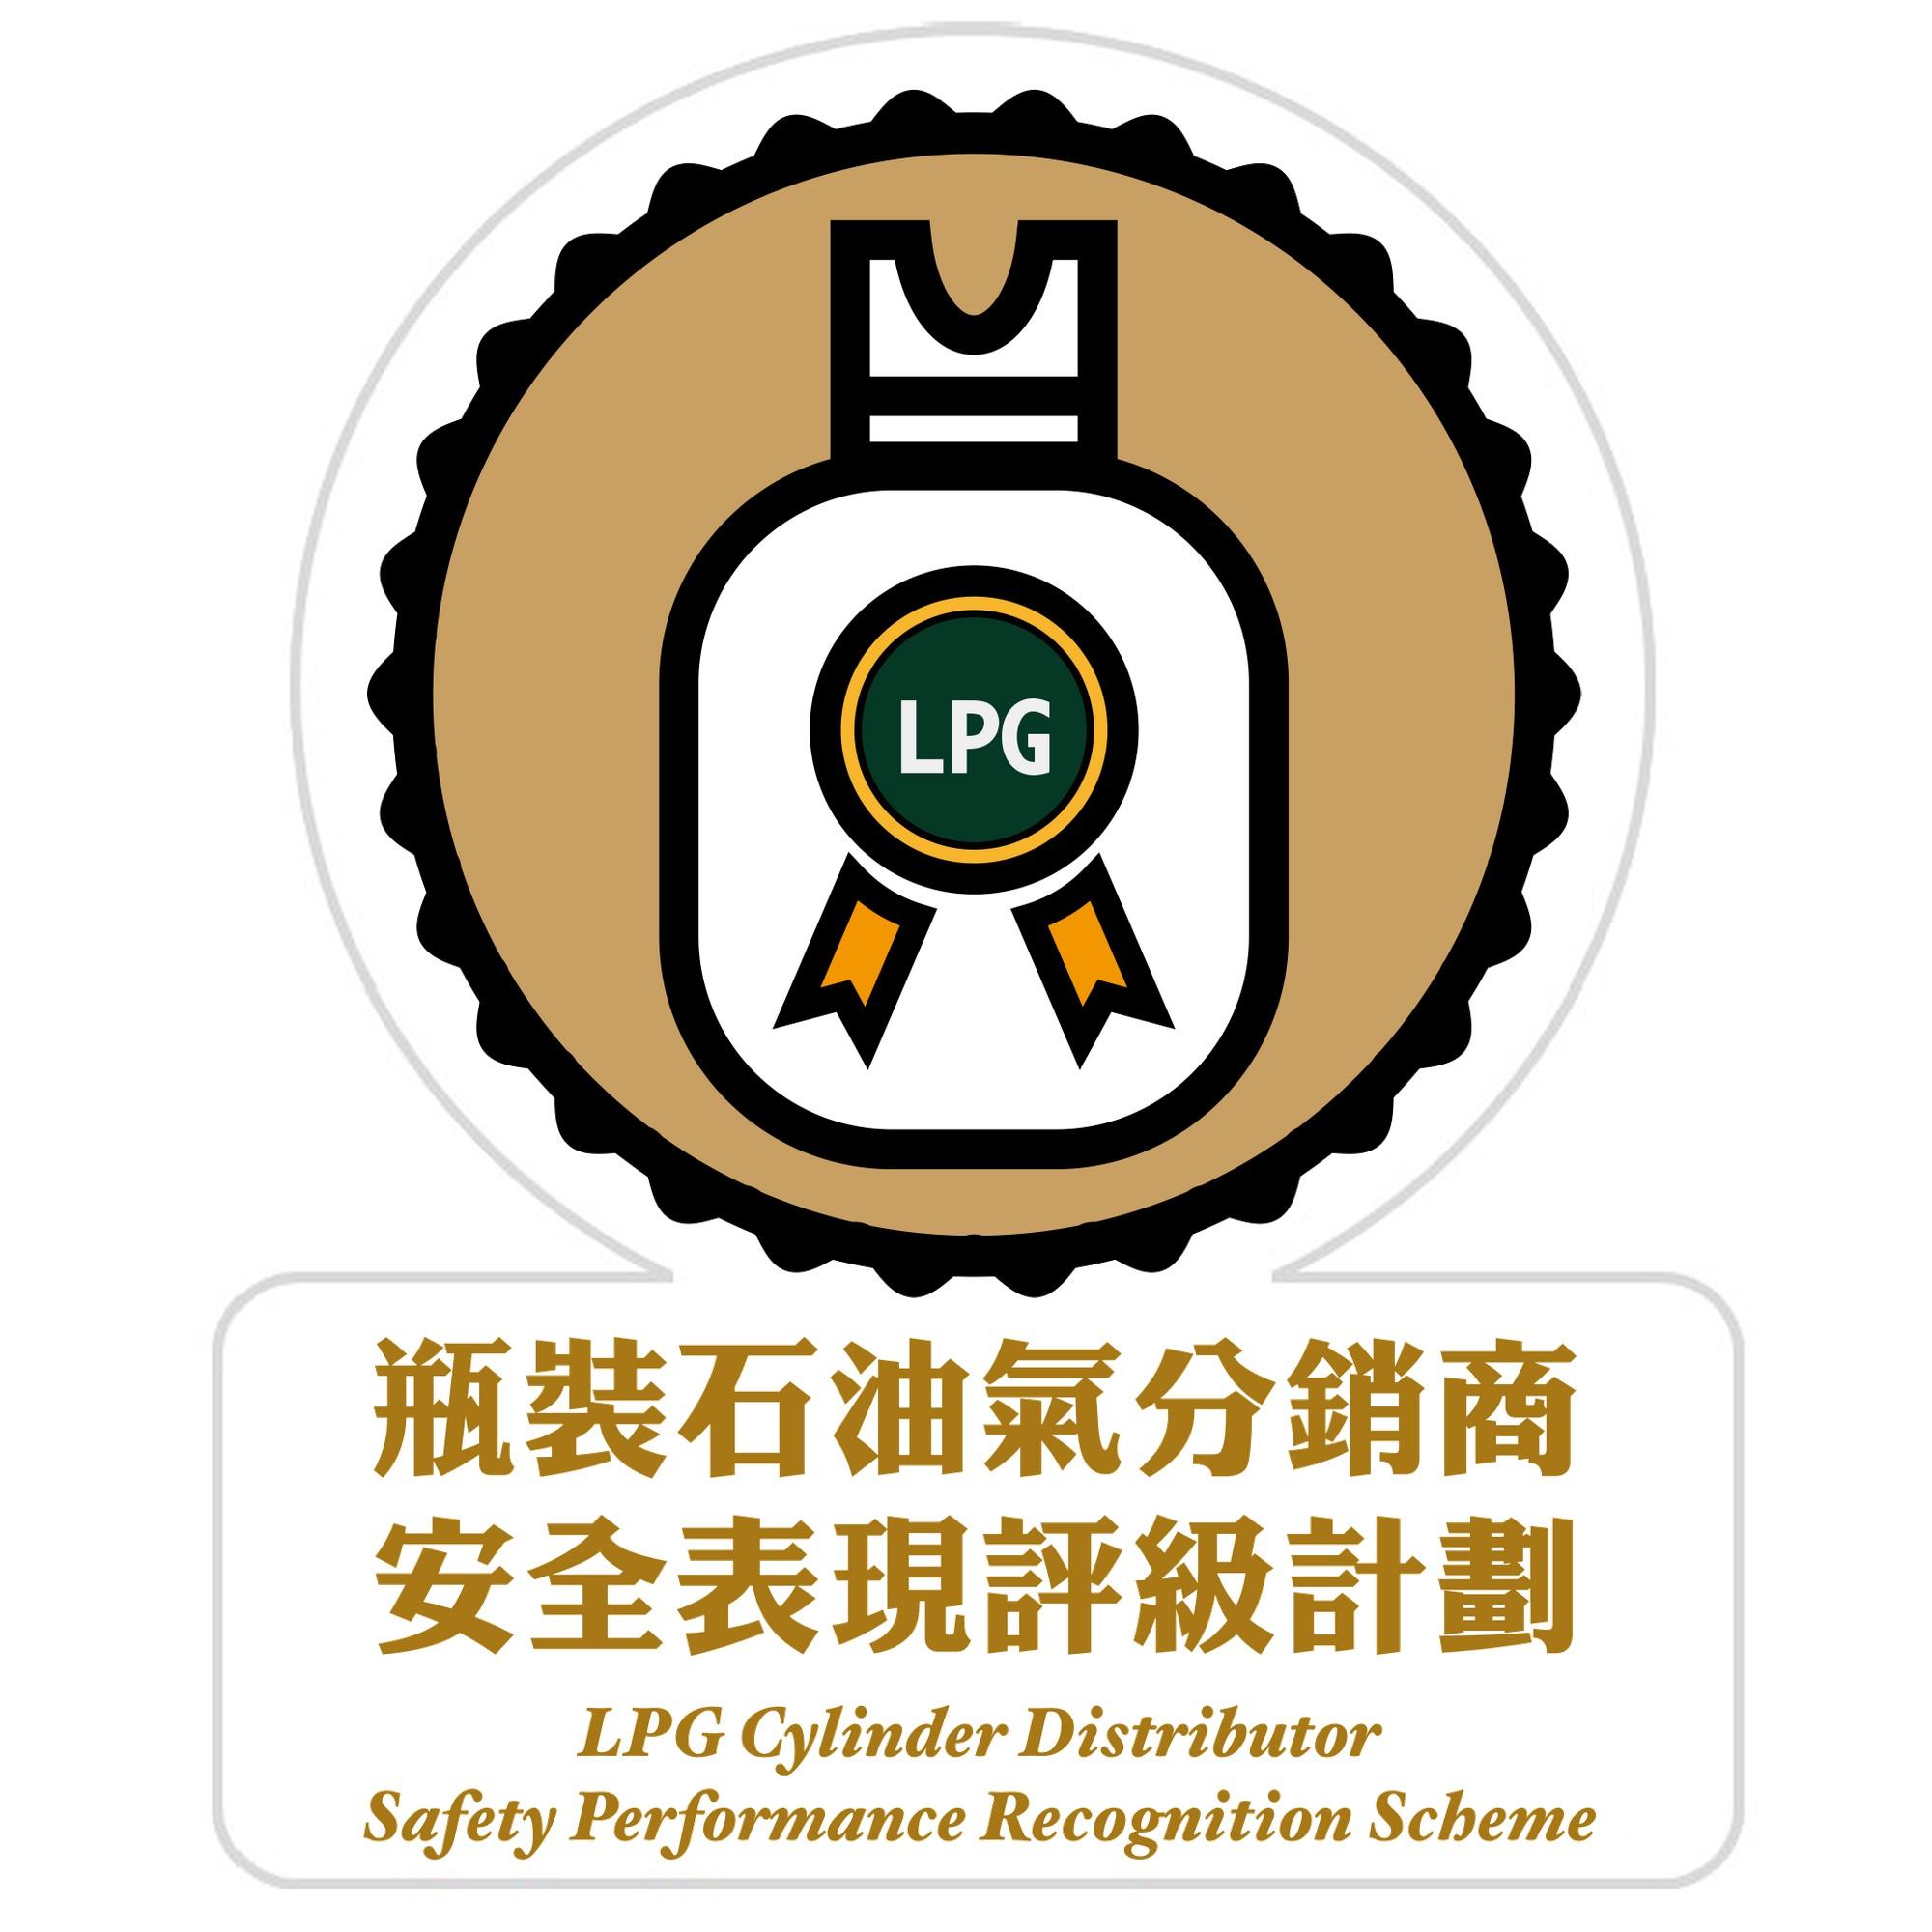 The Electrical and Mechanical Services Department announced today (March 31) the rating results of the Liquefied Petroleum Gas Cylinder Distributor Safety Performance Recognition Scheme for 2022. Picture shows the logo of the Scheme.